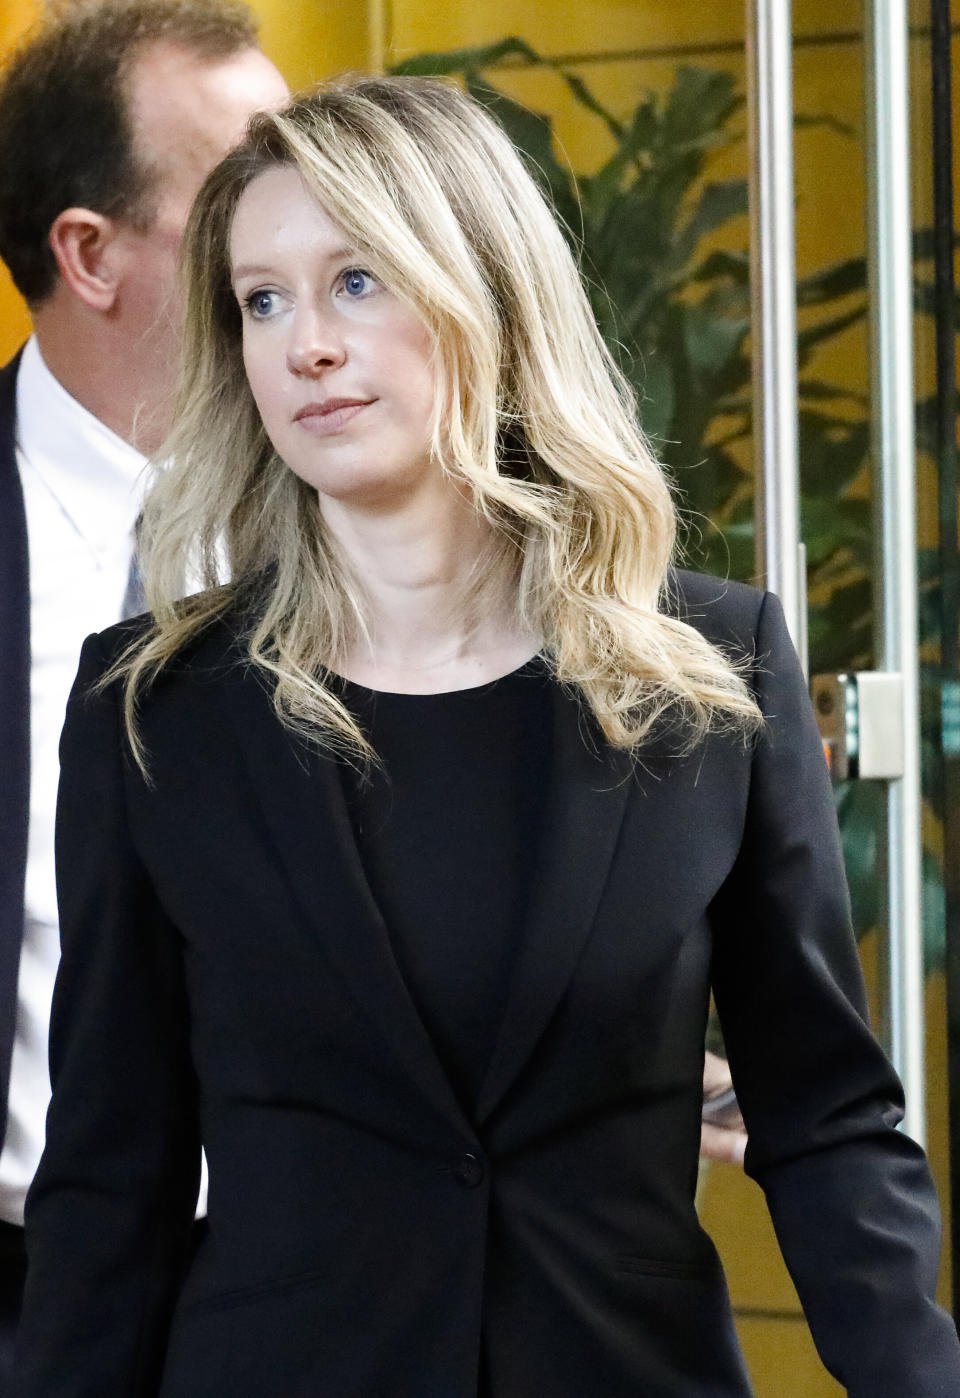 Elizabeth Holmes leaves court on July 17, 2019 without her signature heavy makeup. (Photo: Kimberly White via Getty Images)